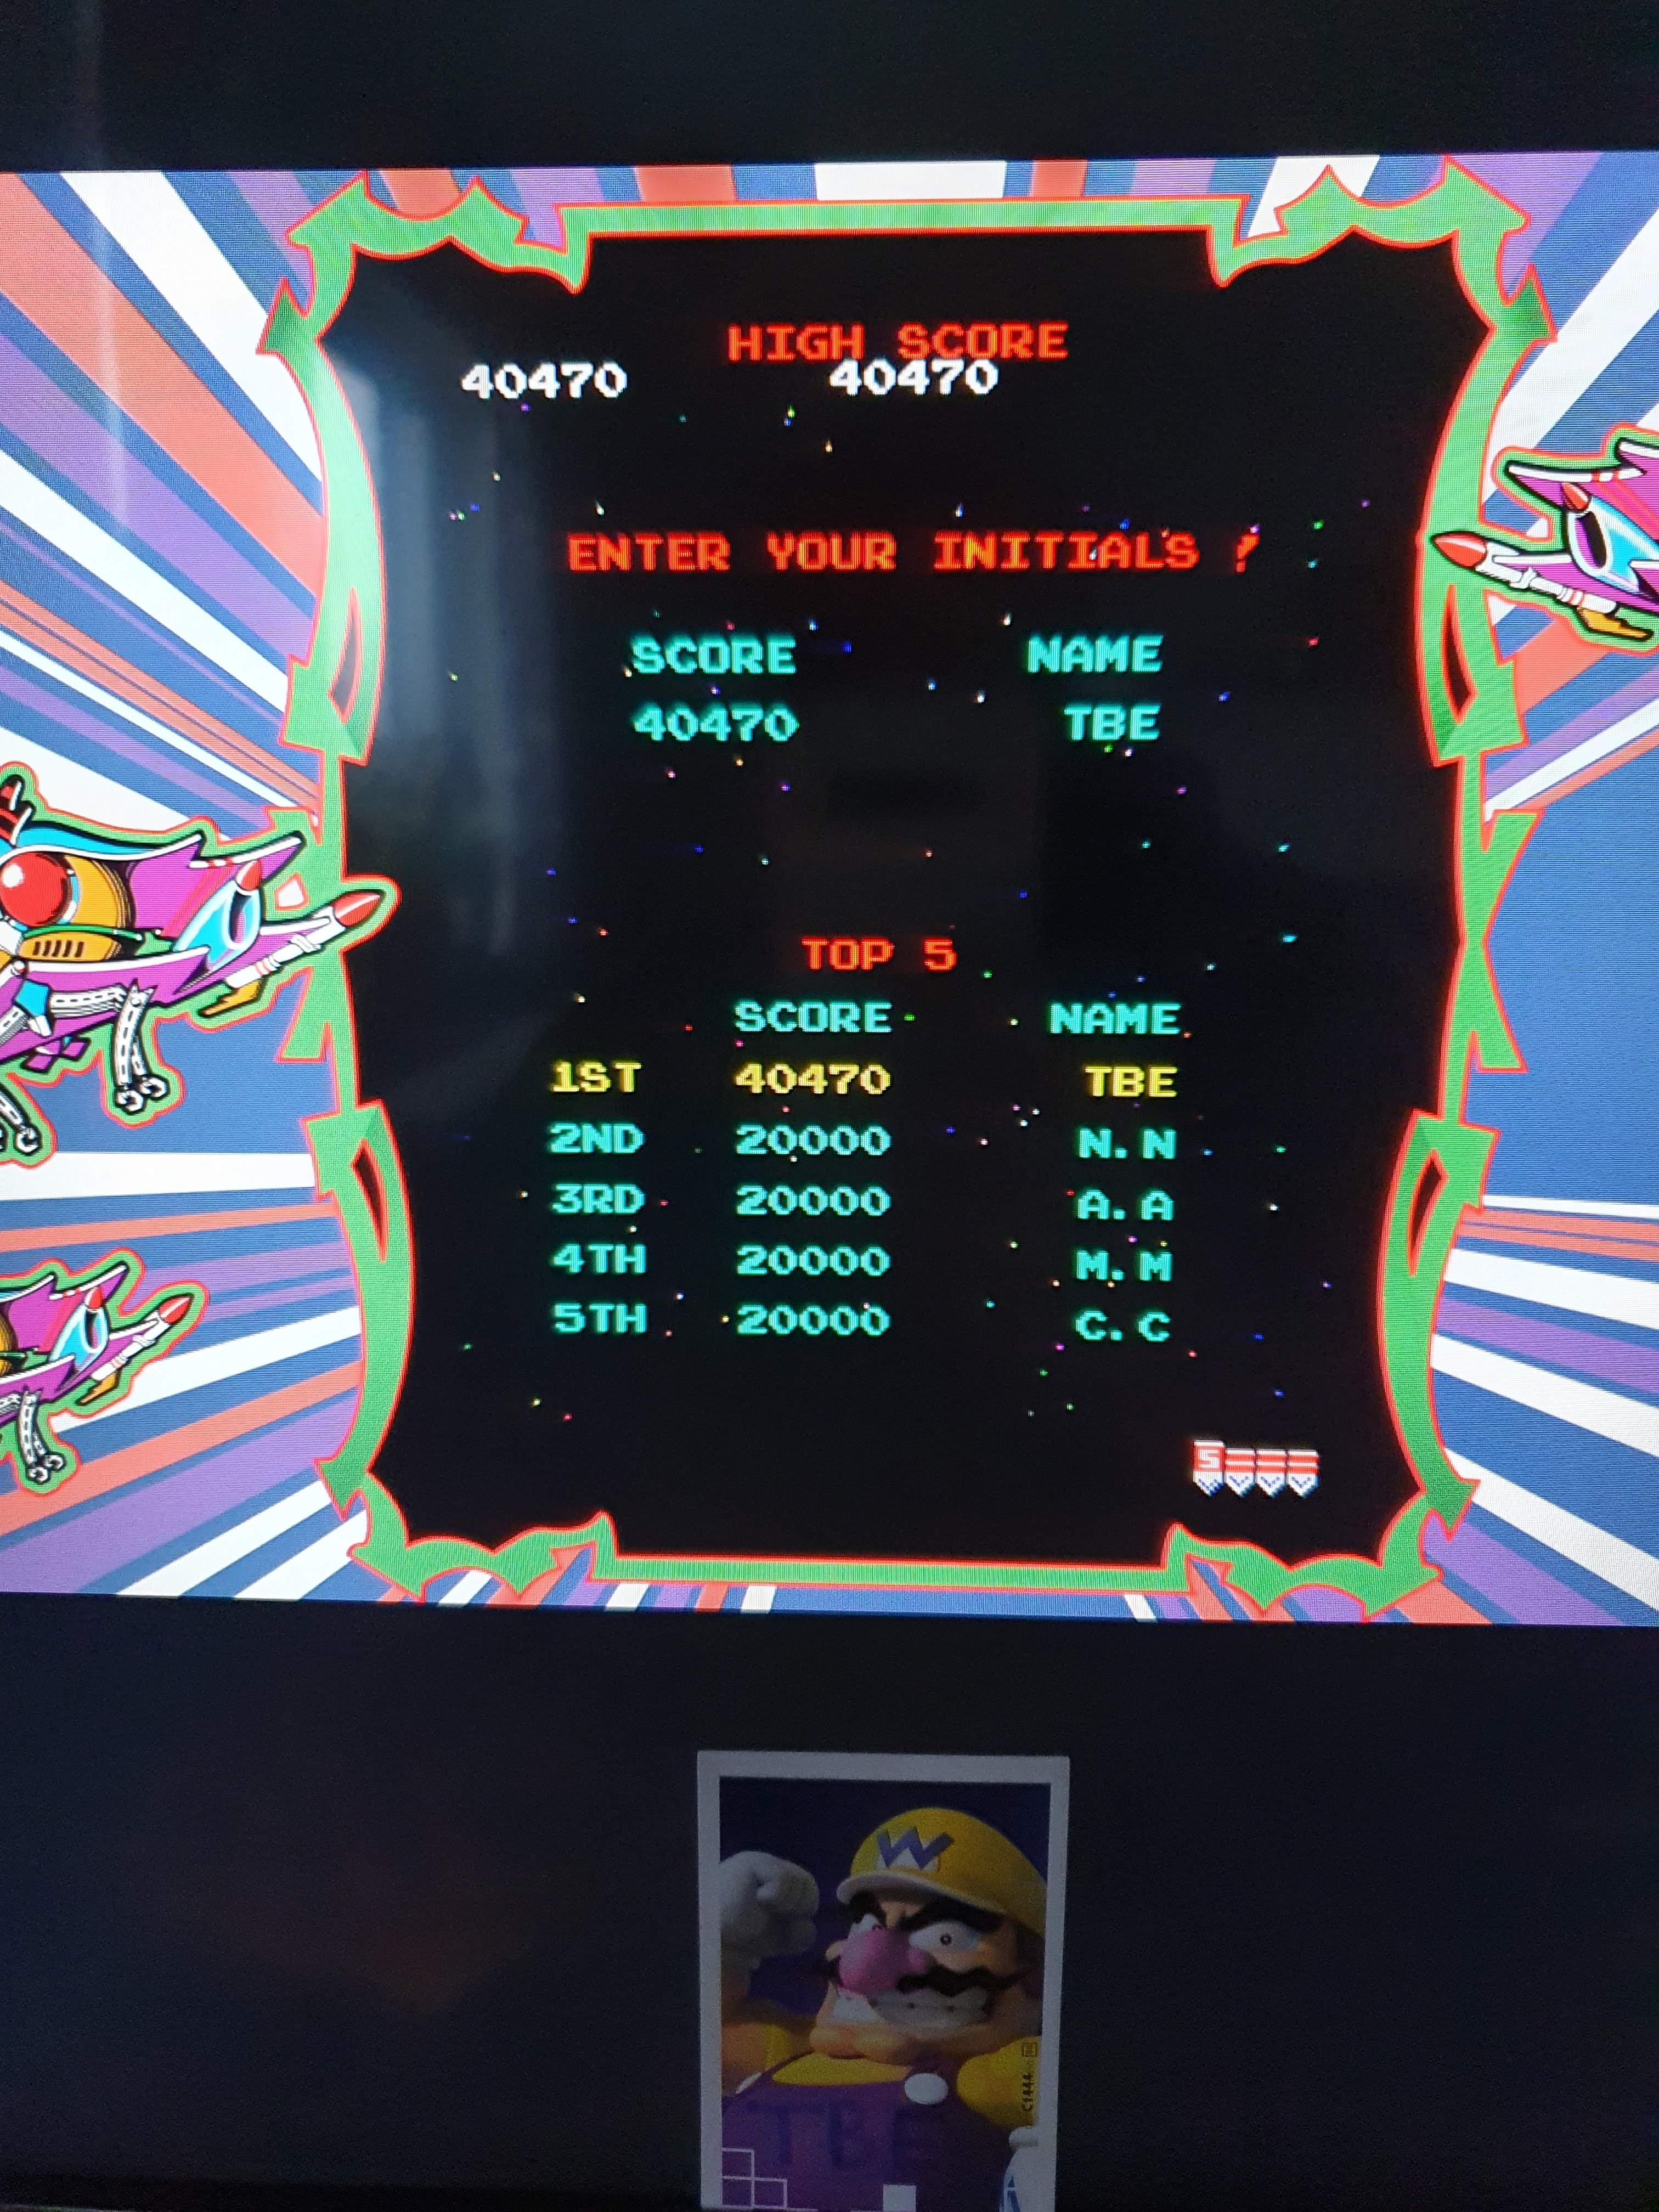 Sixx: Namco Museum: Galaga [Normal] (Nintendo Switch) 40,470 points on 2020-05-01 09:56:00